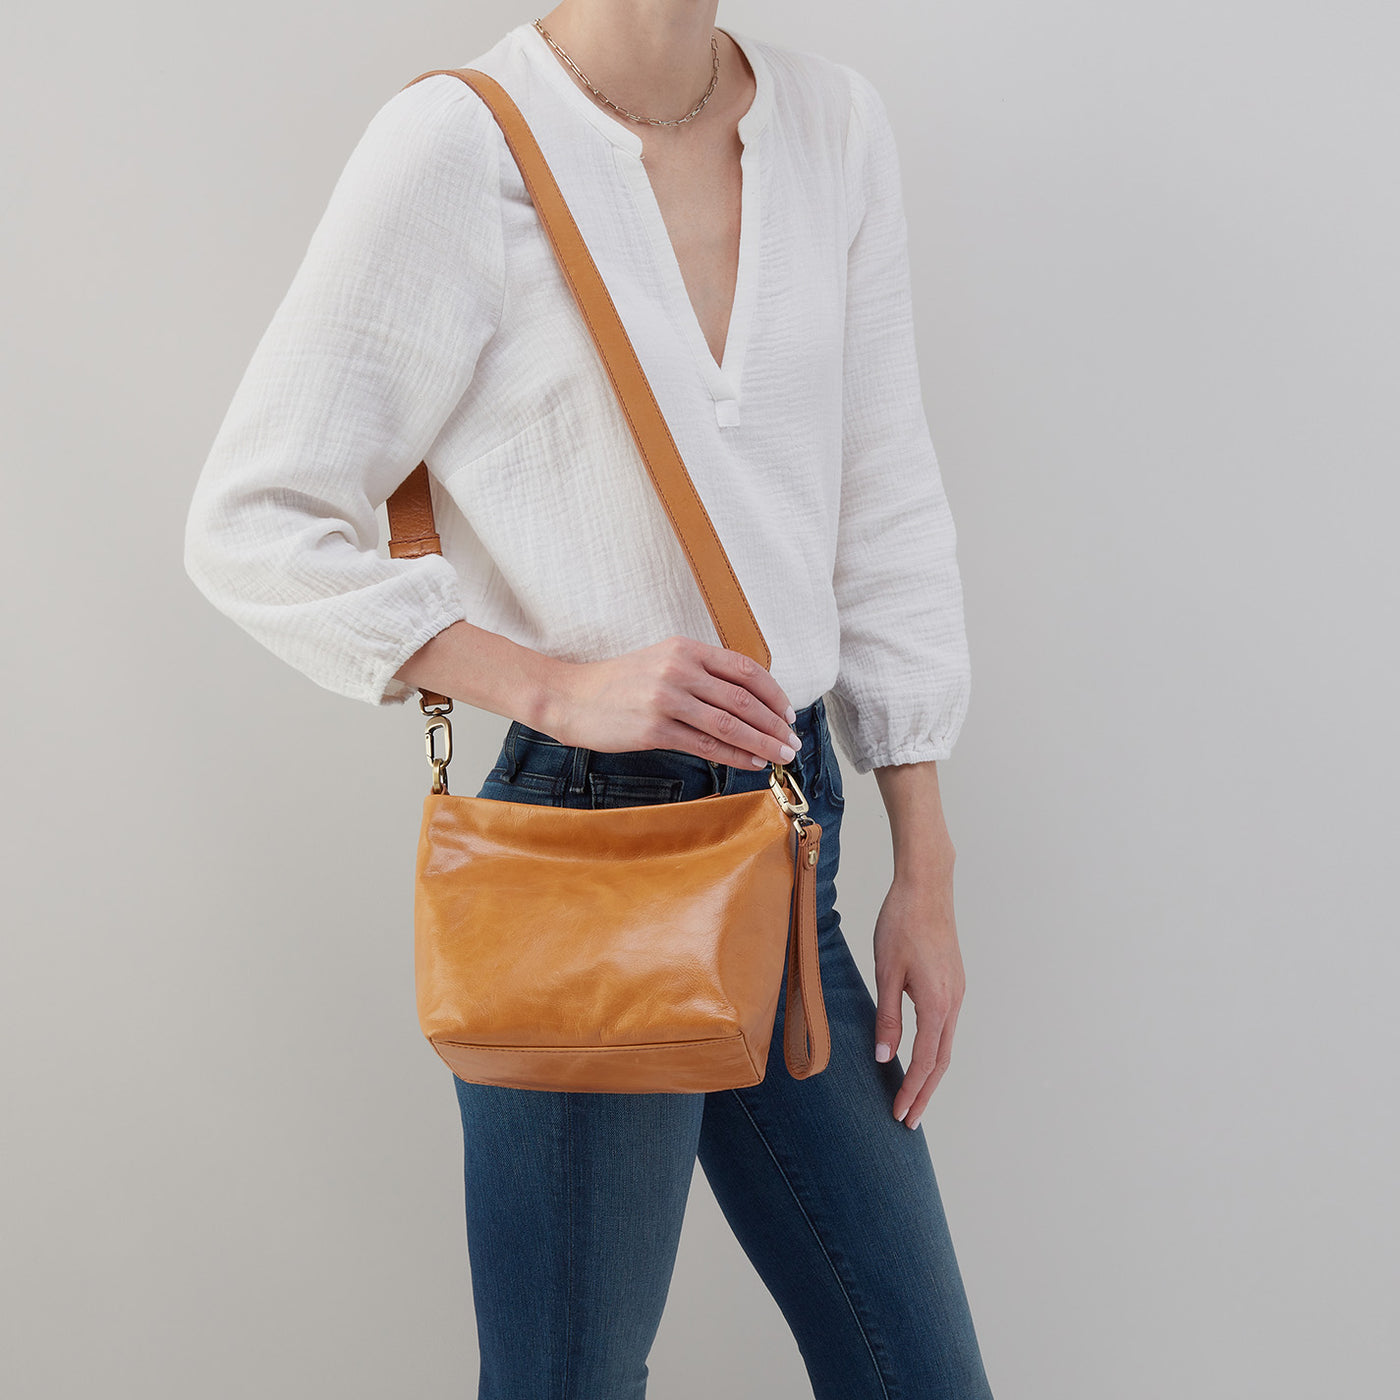 Ashe Crossbody in Polished Leather - Cherry Blossom